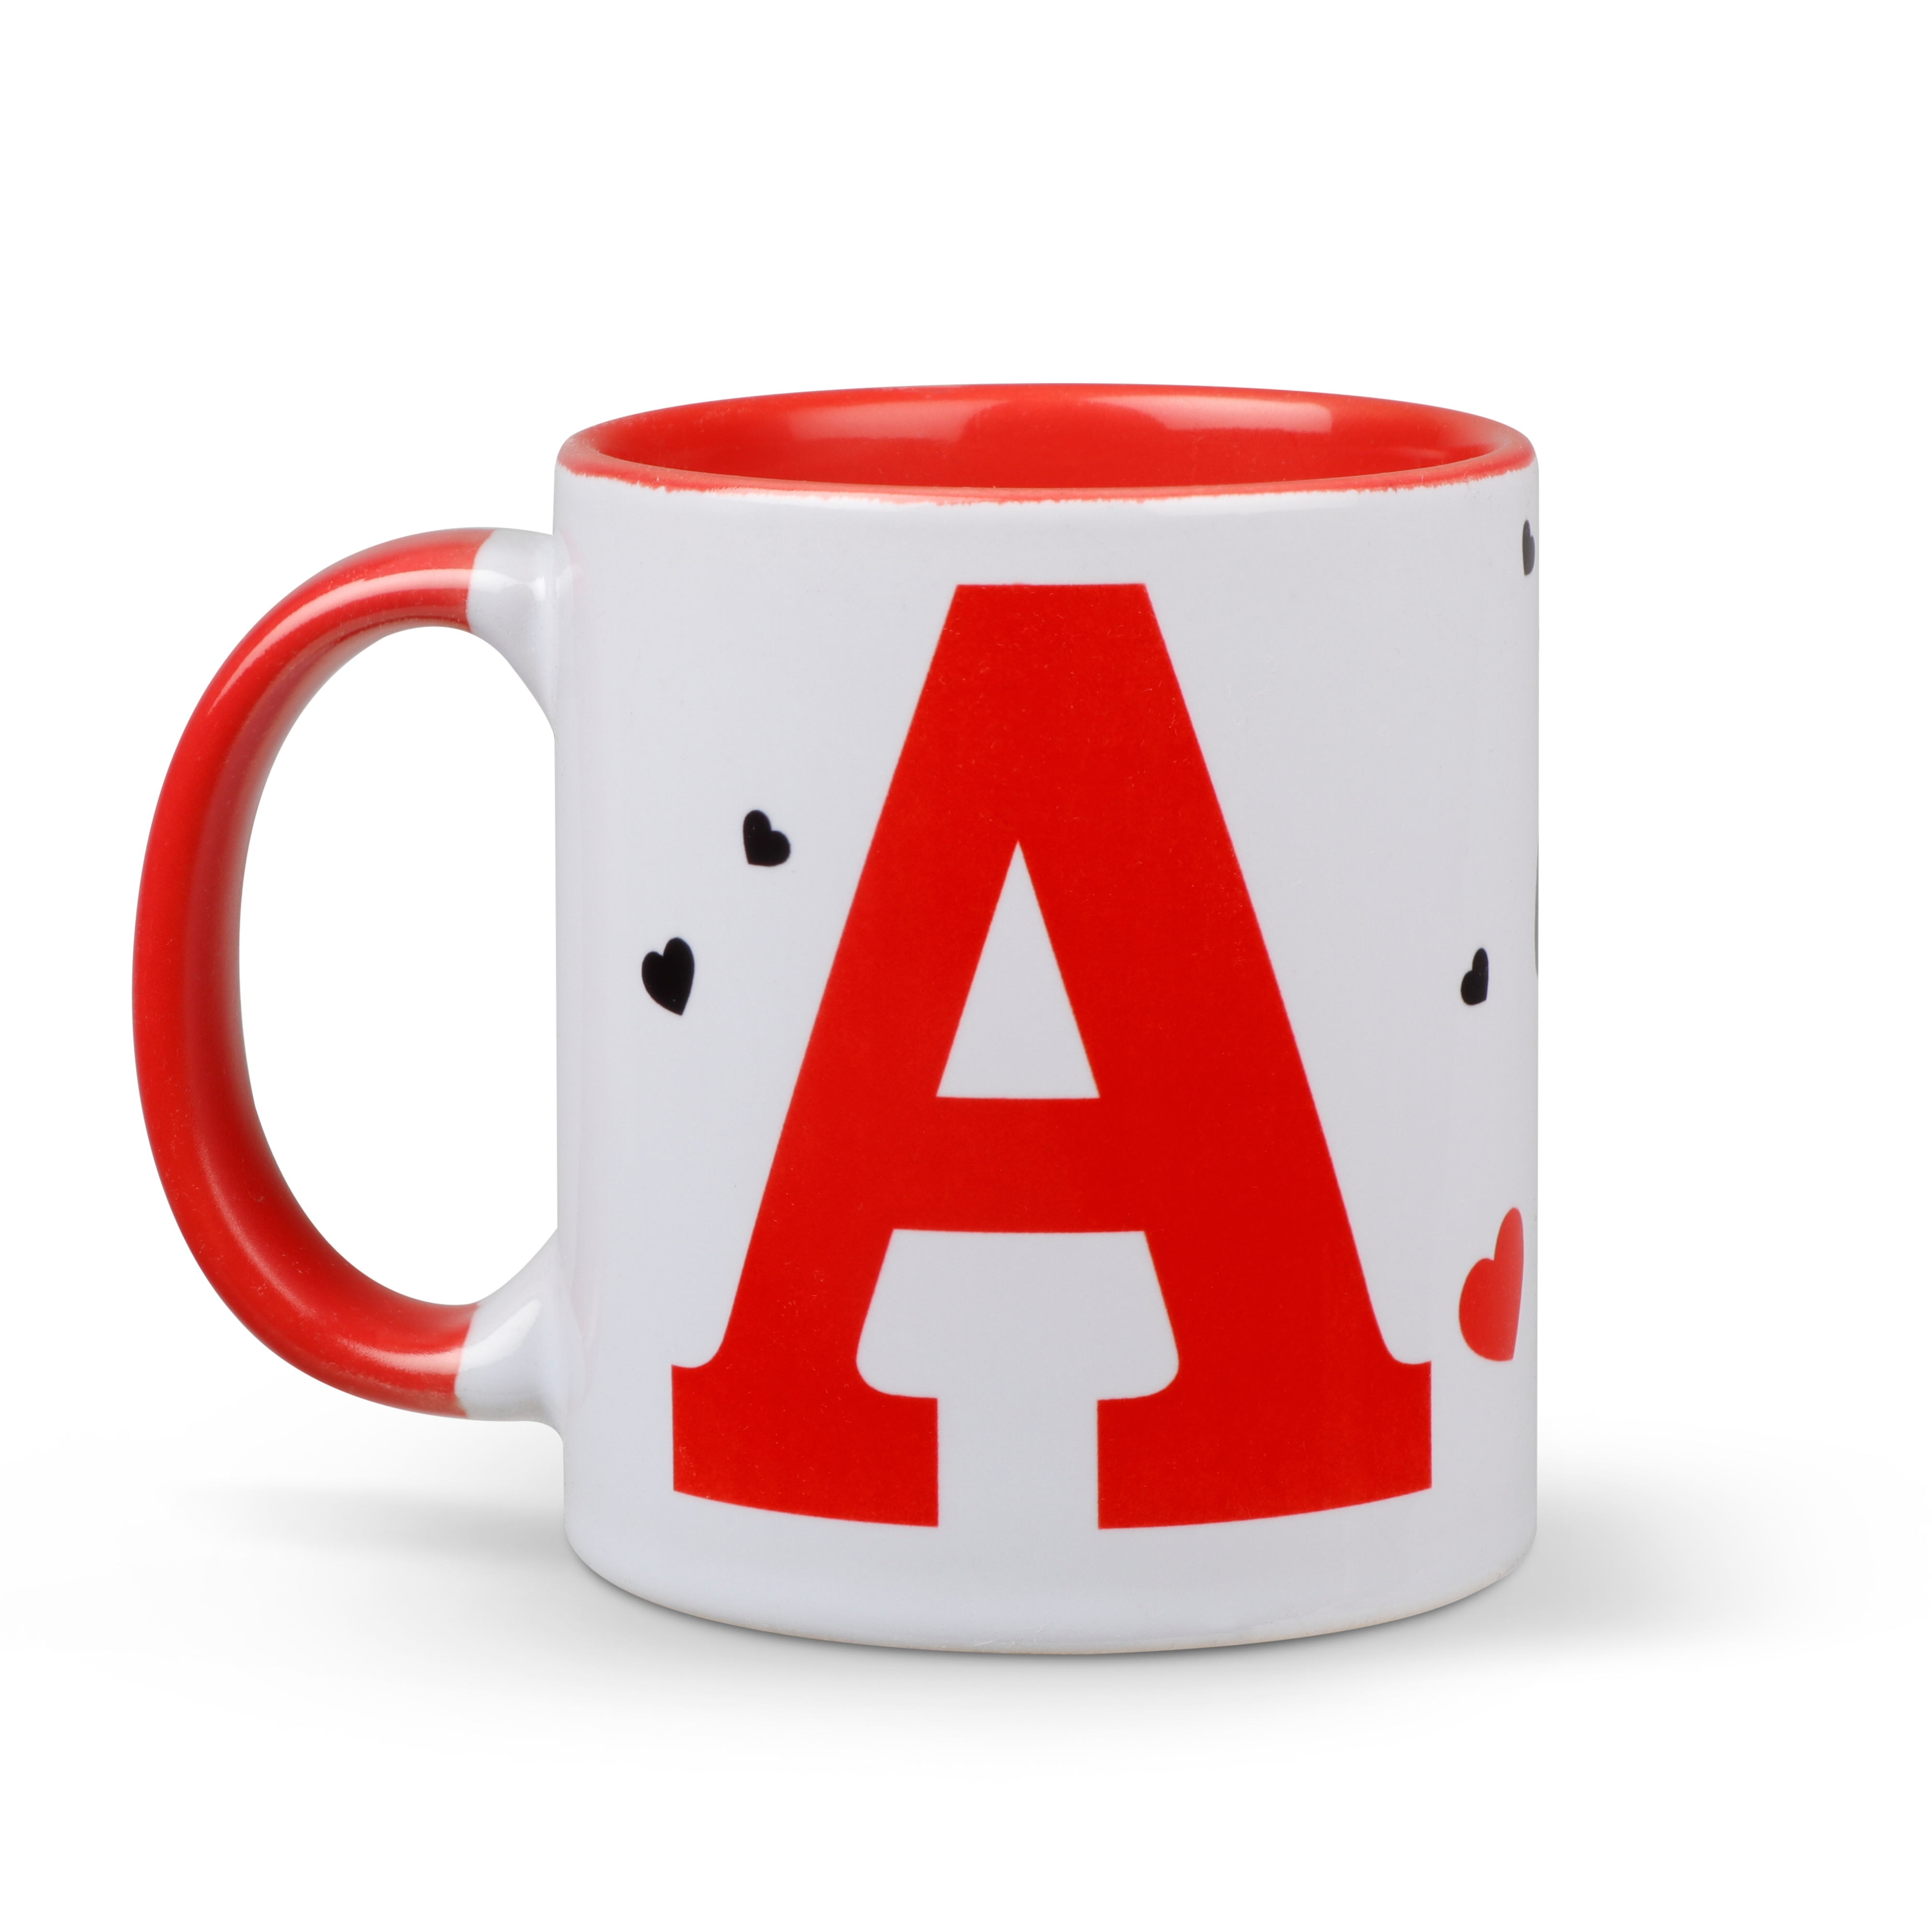 Archies | Archies KEEPSAKE MUG - A-IS FOR MY ANNIVERSIRY LOVE LAUGHTER AND MEMORIES Mug Coffee Cup White Printed Ceramic Gift  (12 x 11 x 9) (350 ml)